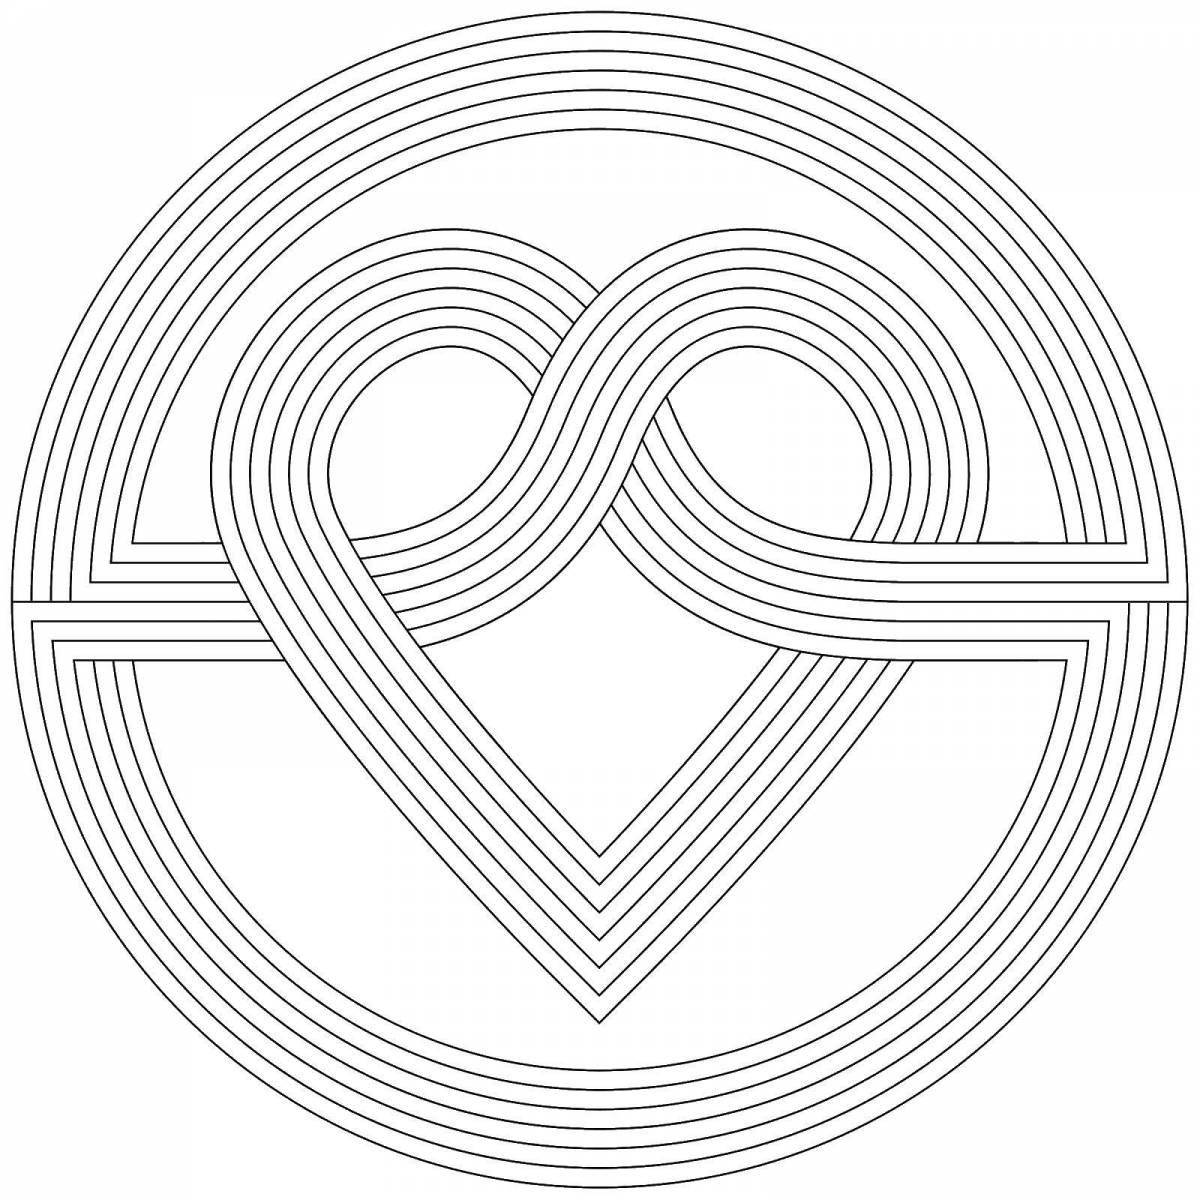 Coloring page magical anti-stress spirals